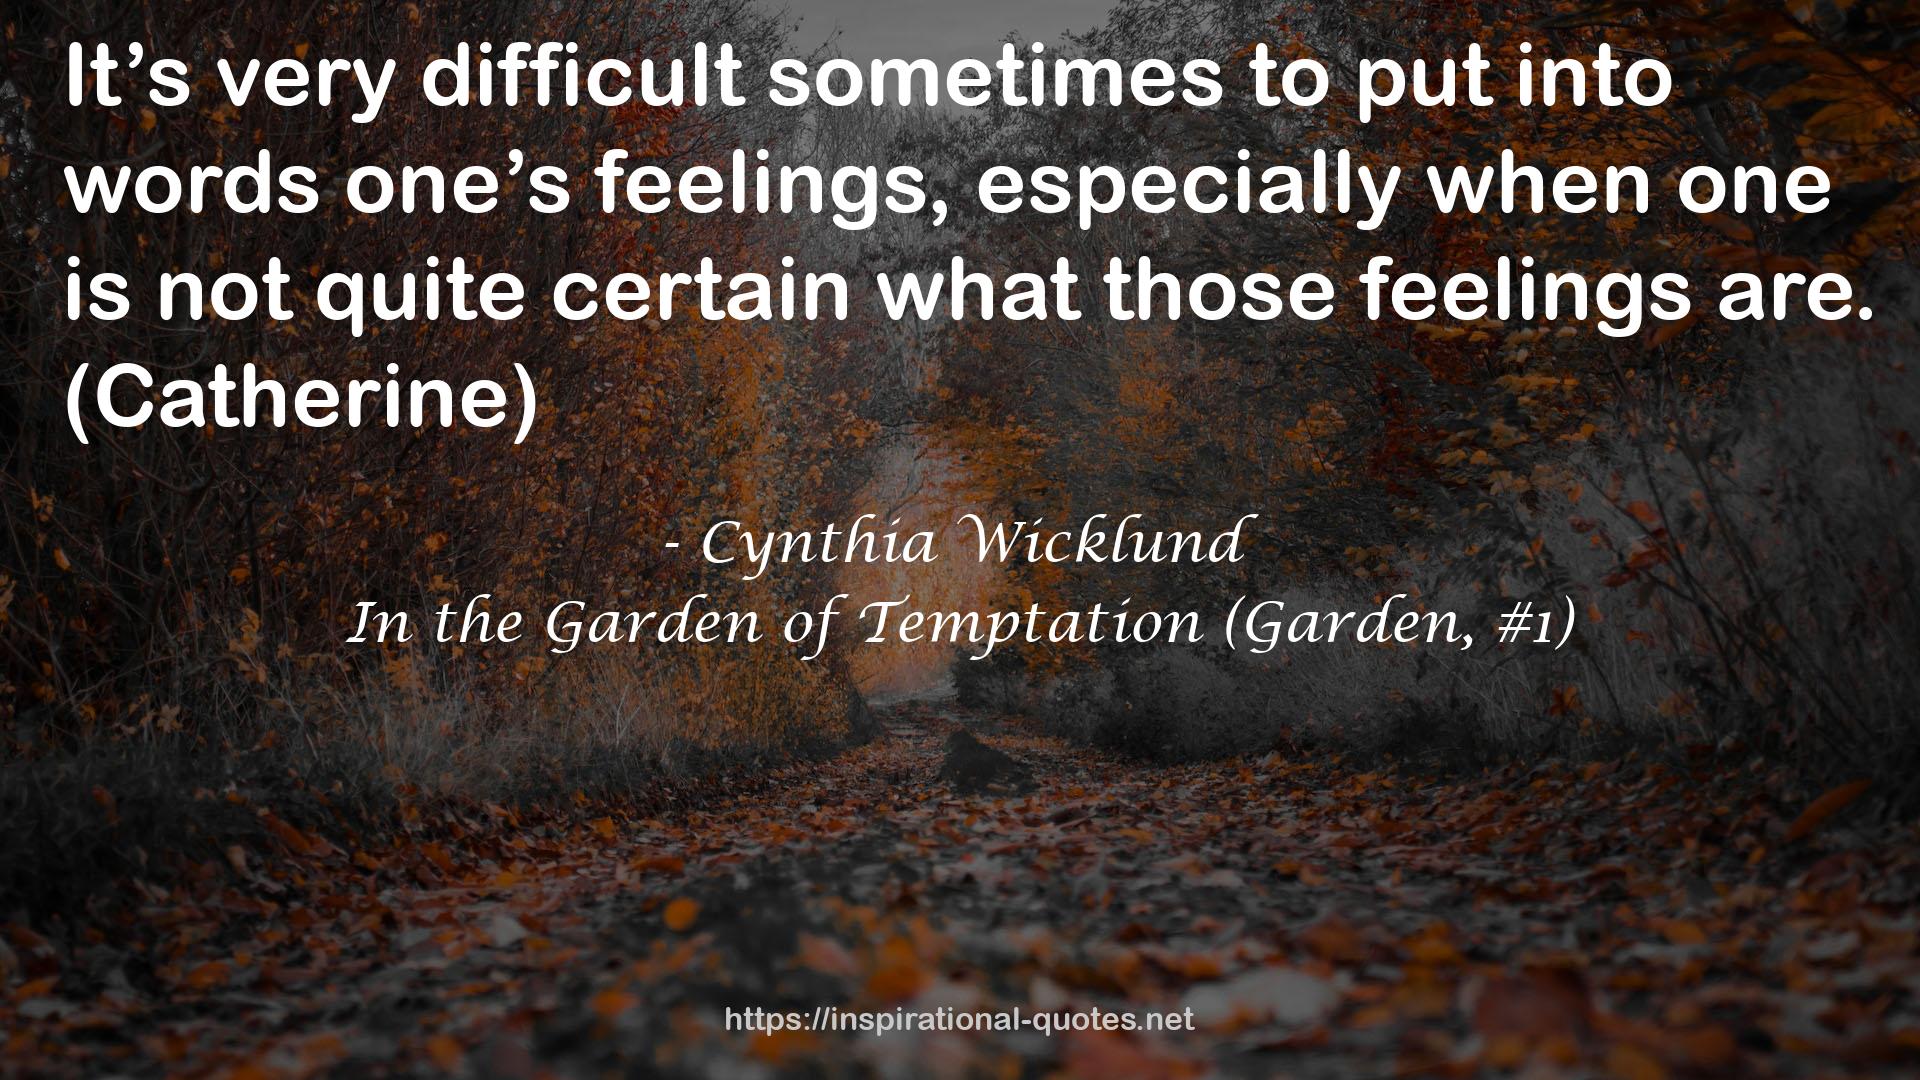 Cynthia Wicklund QUOTES